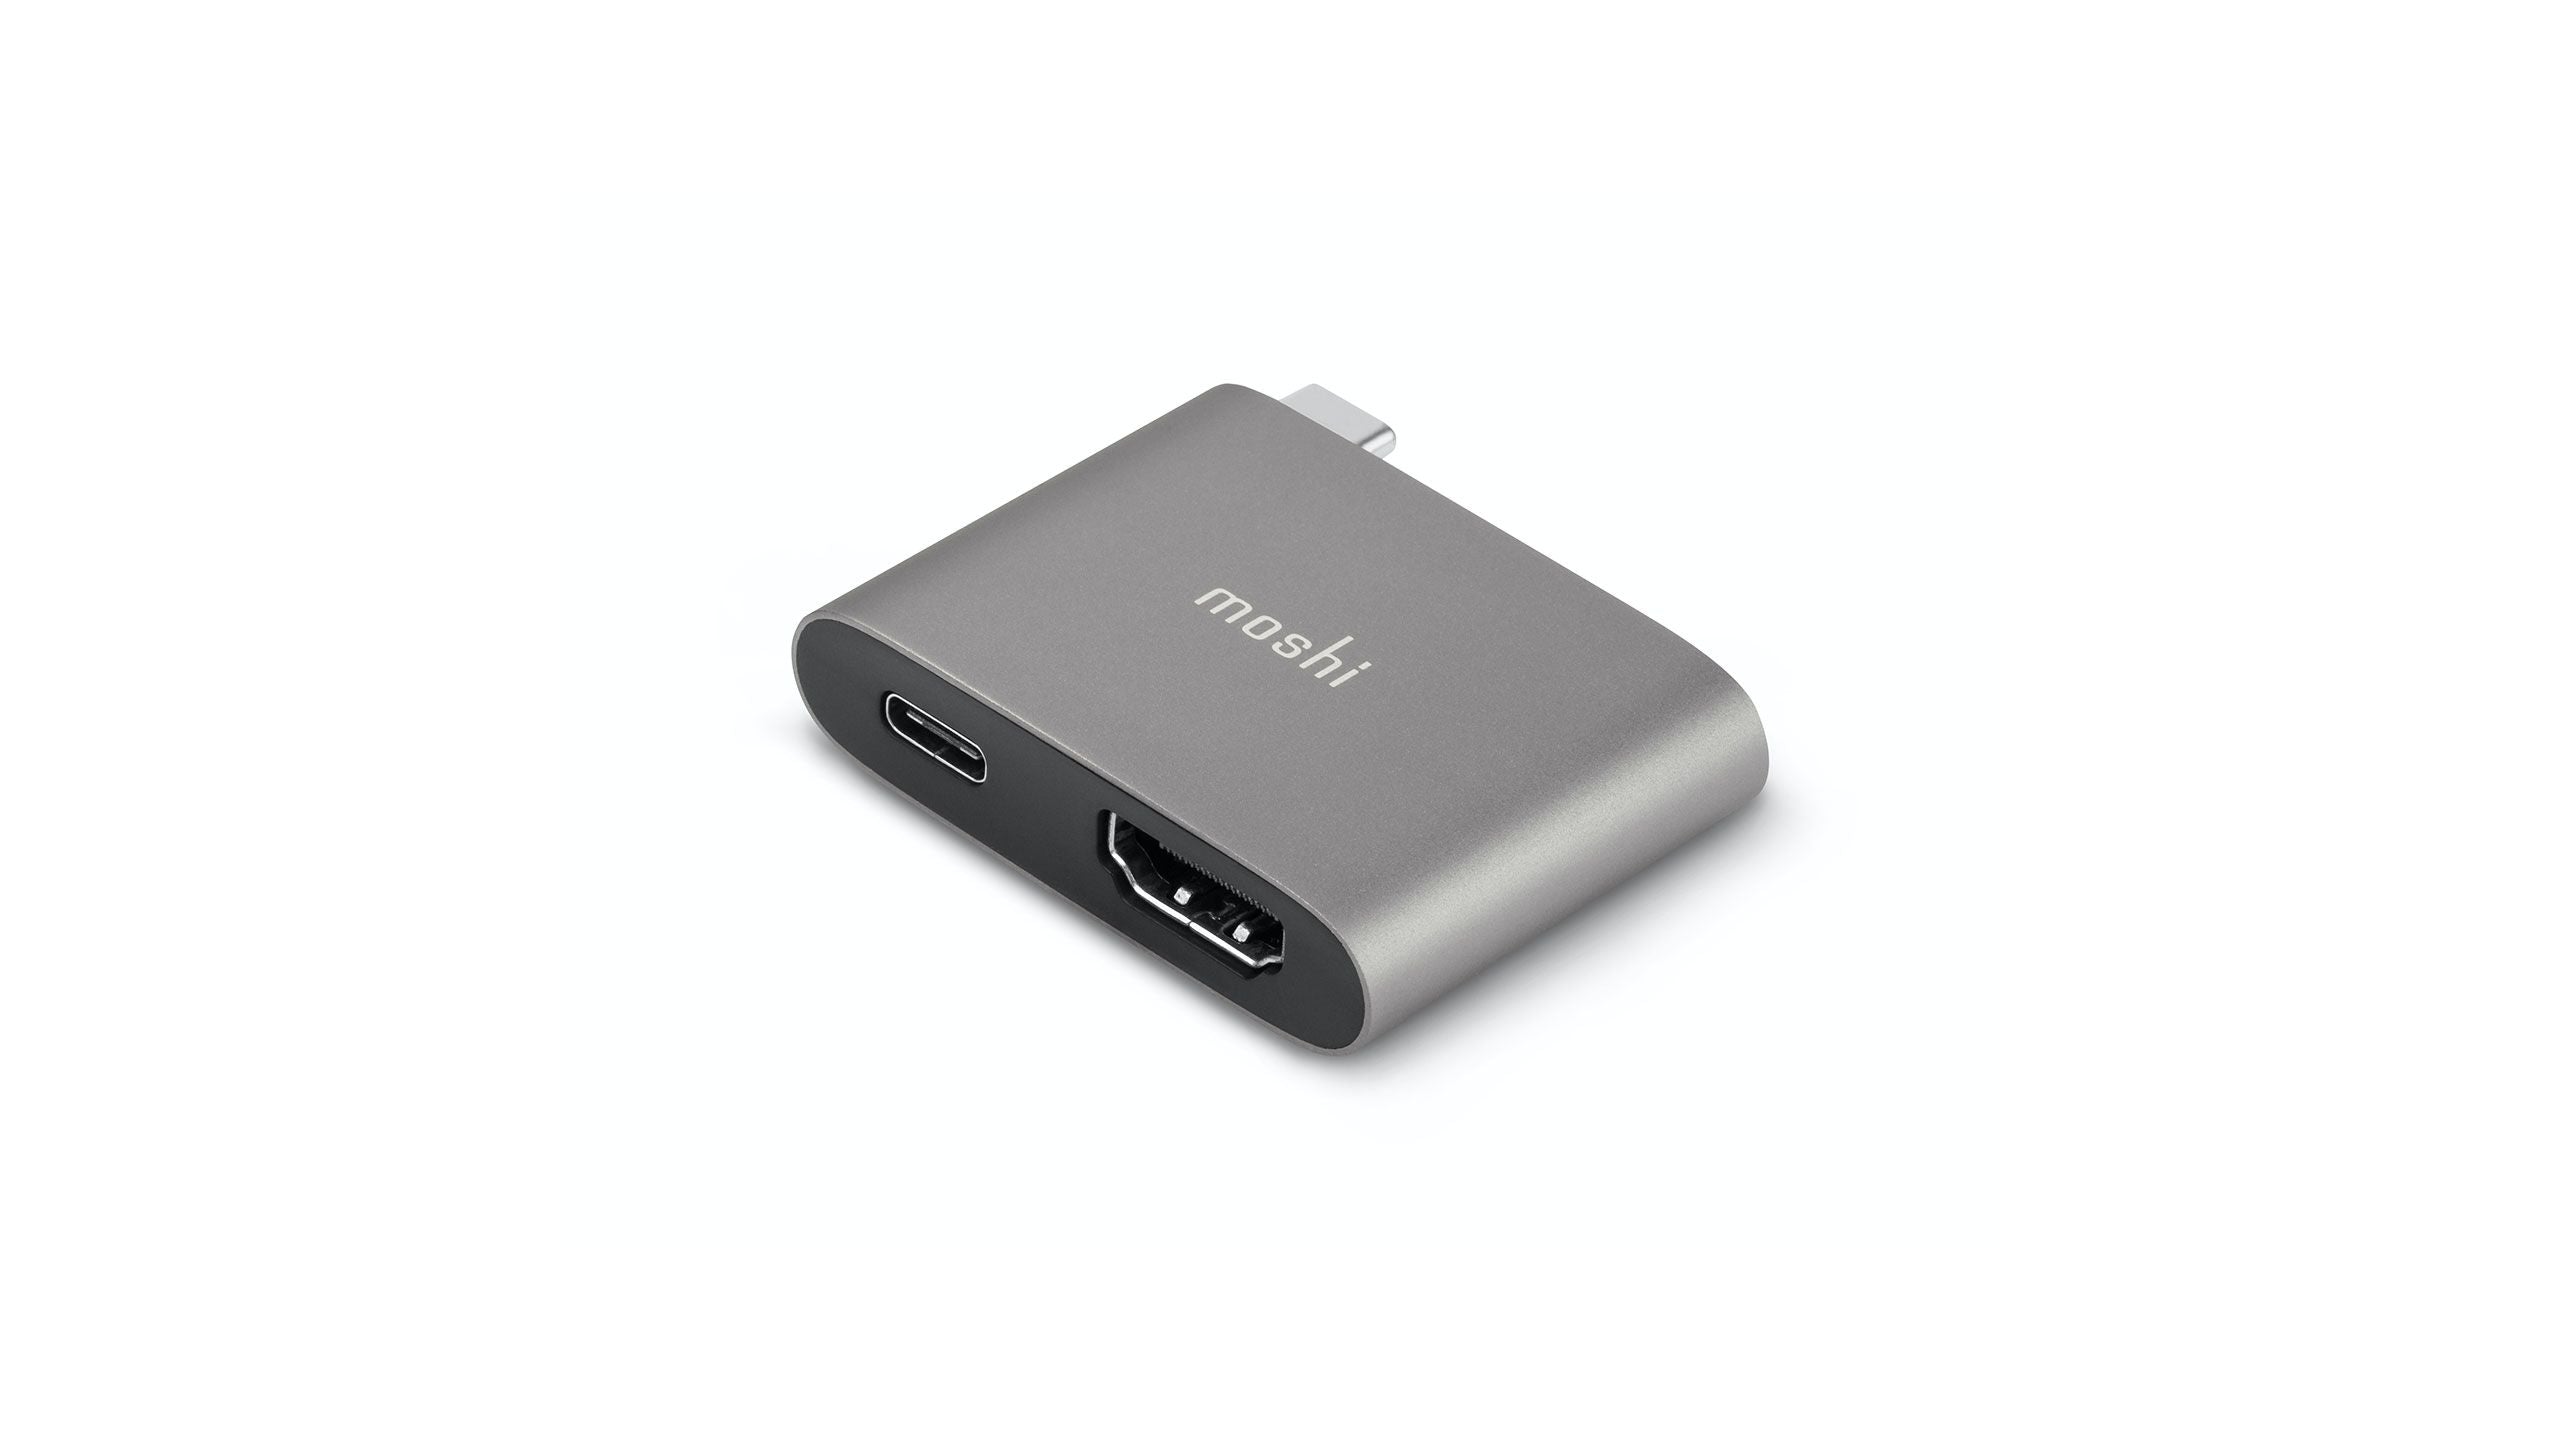 USB-C TO HDMI 4K ADAPTER